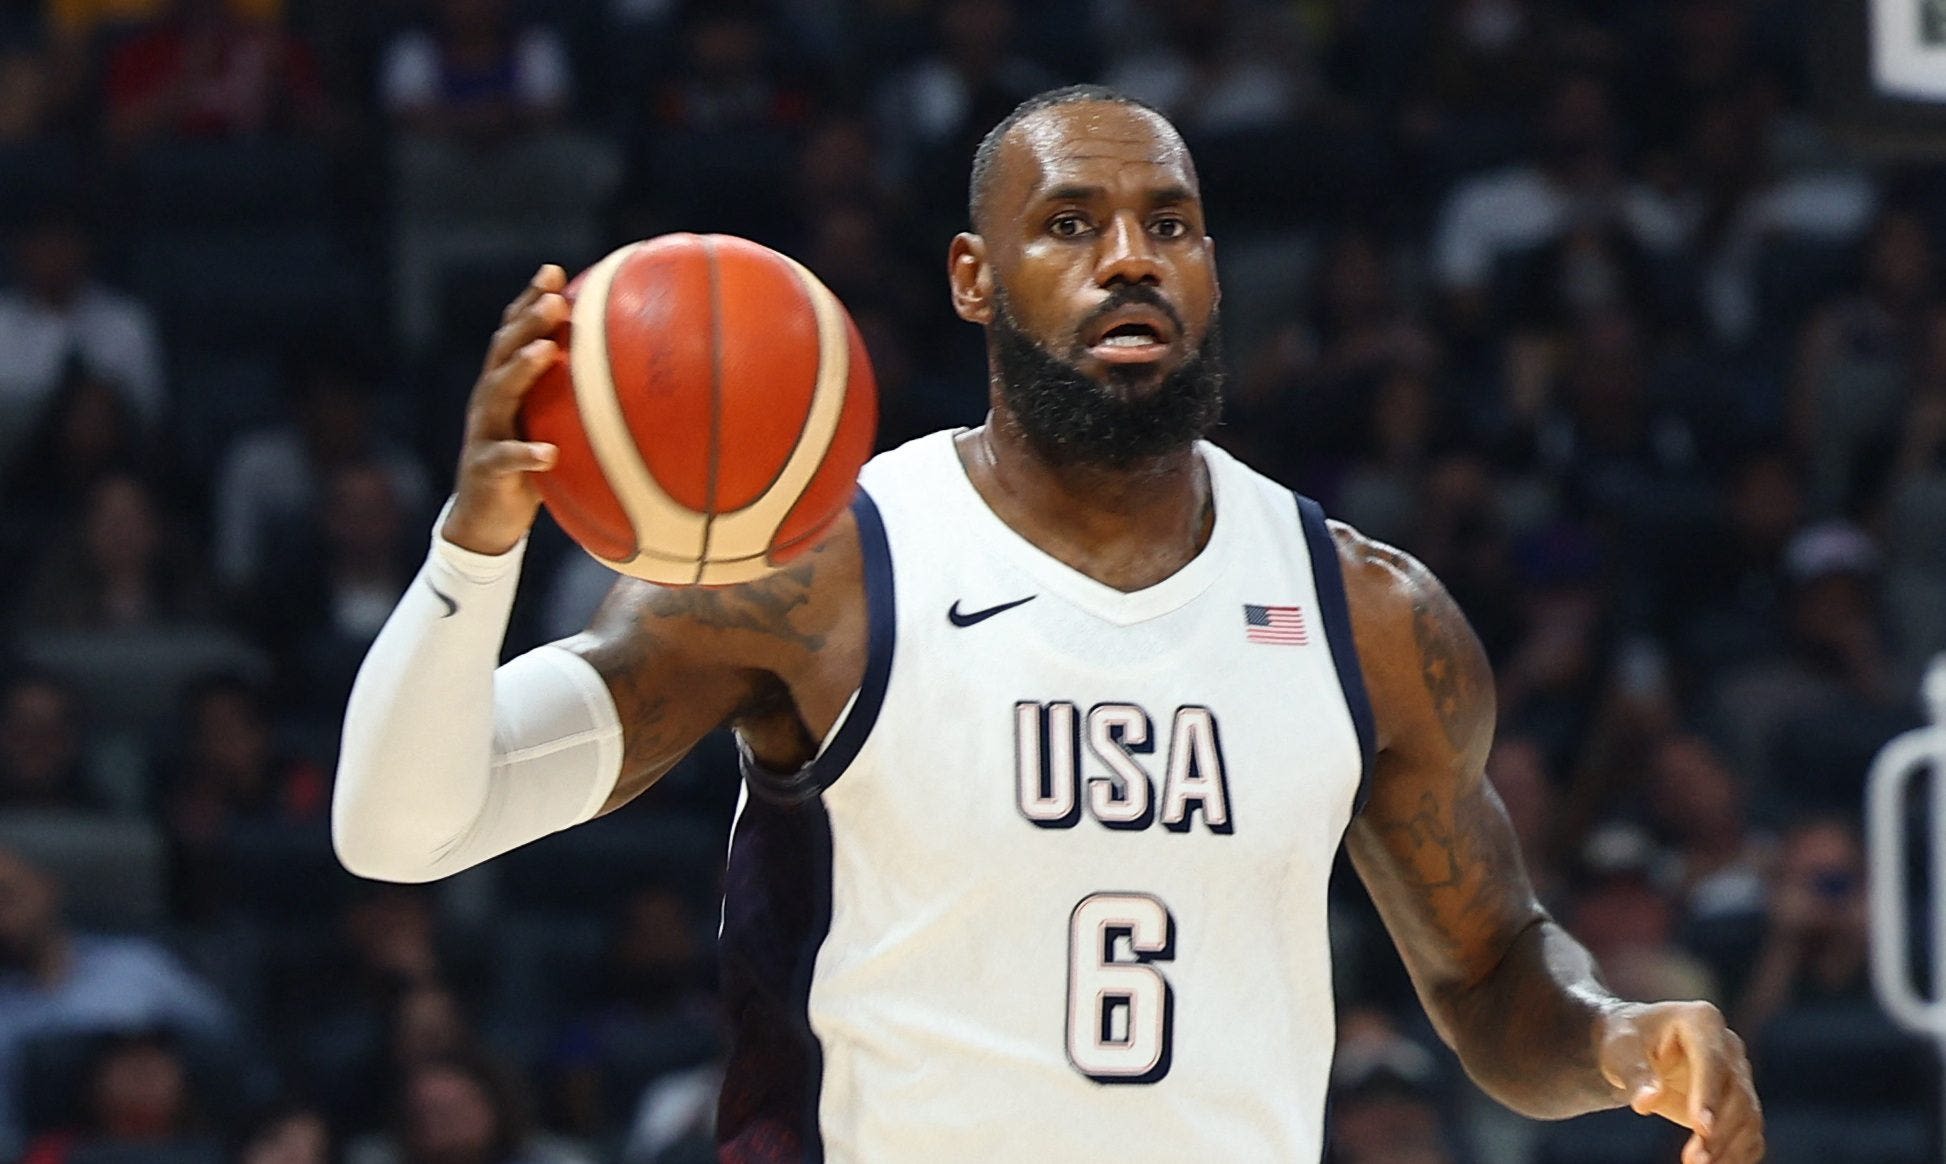 How to watch Team USA vs Germany basketball today: Time, TV channel, streaming information